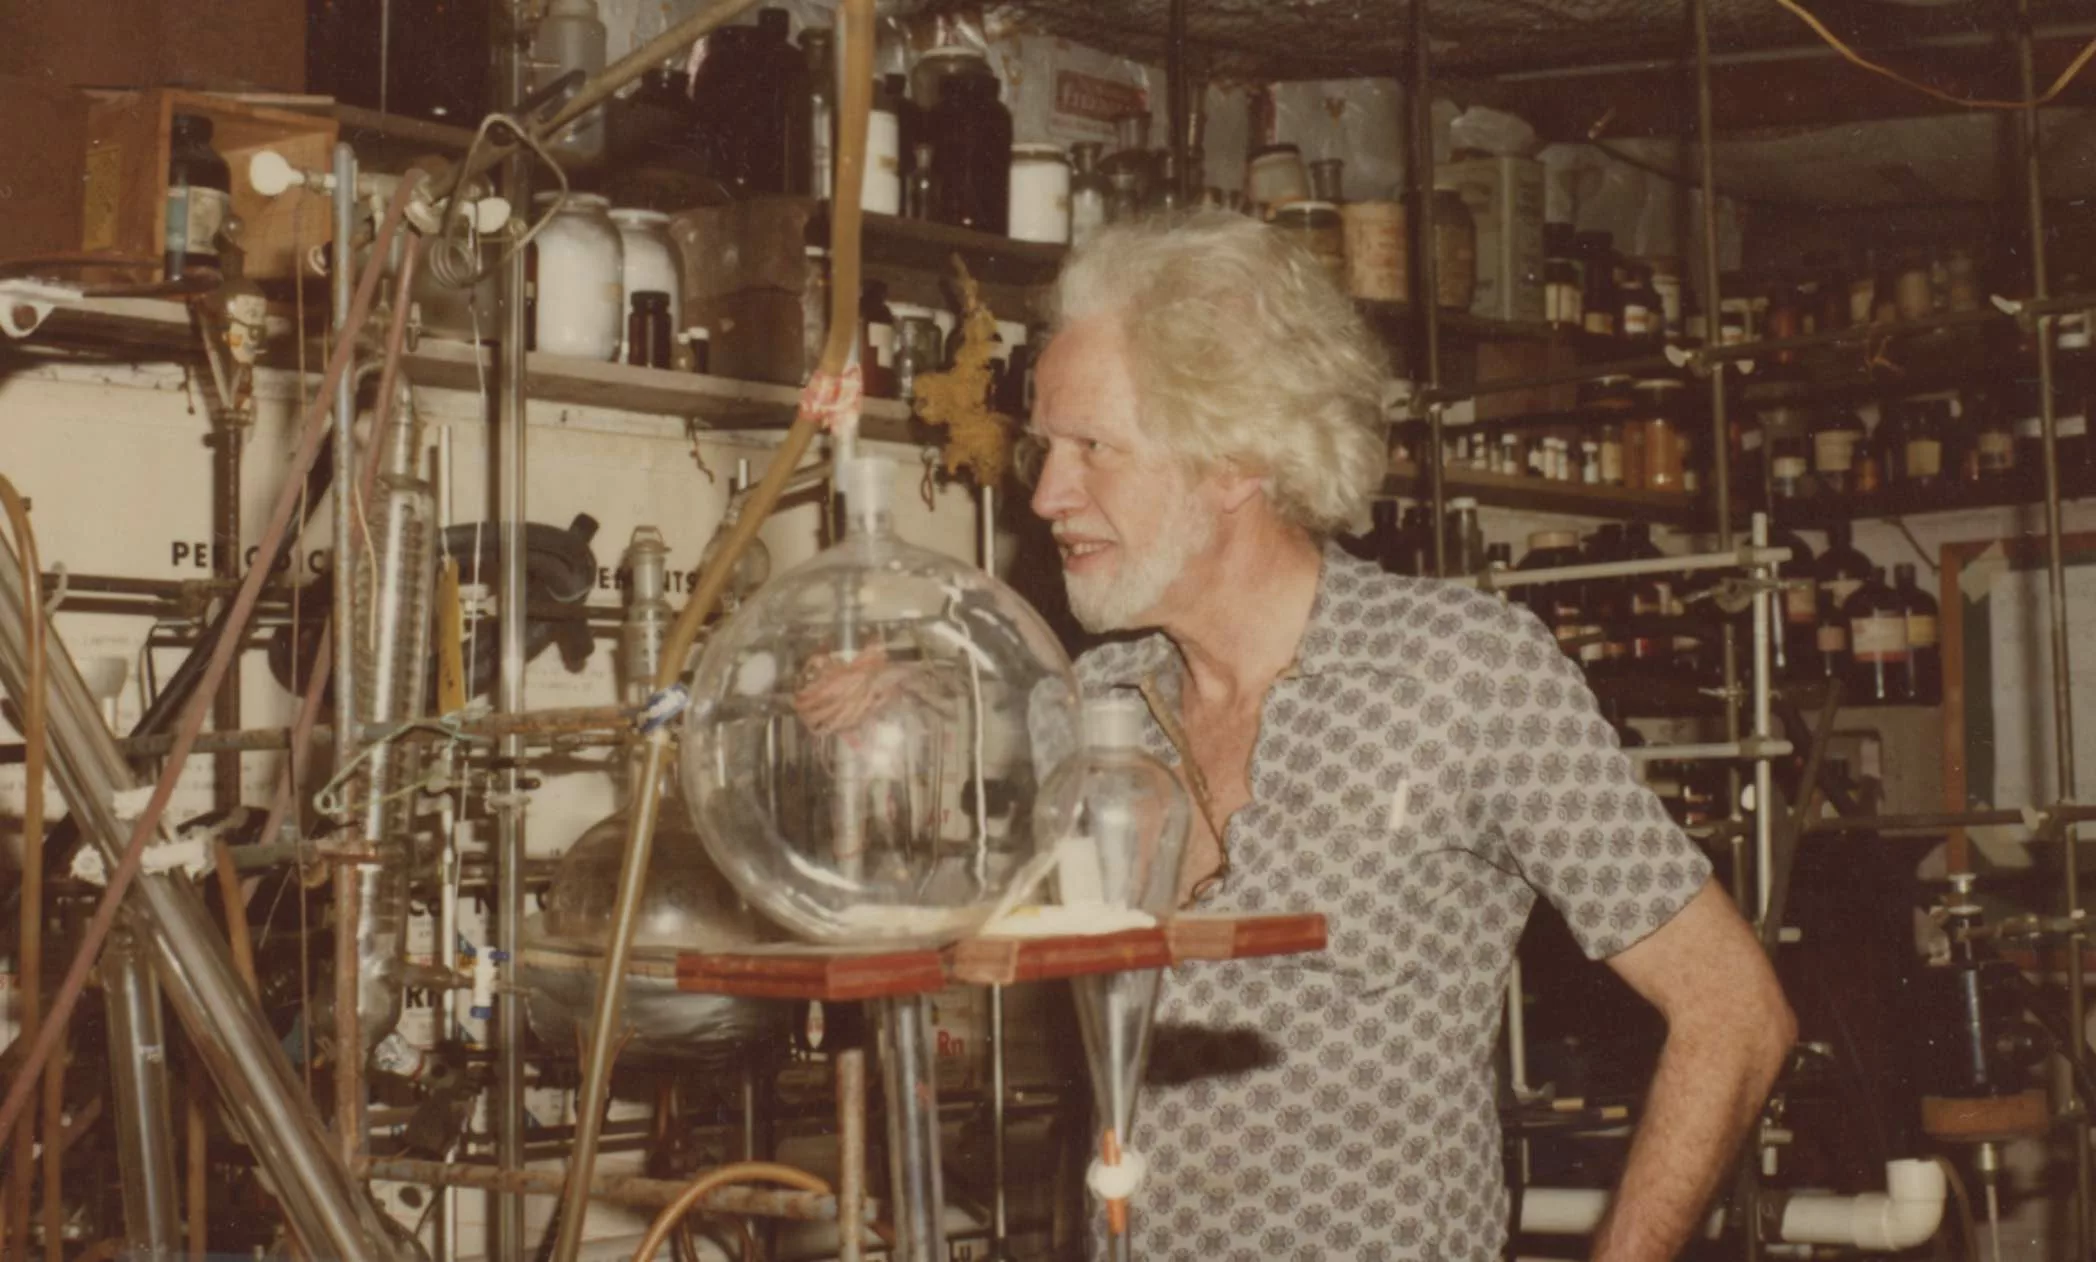 a man with a grey beard, grey hair, and wild look in his eyes stands in what appears to be a home-made lab.